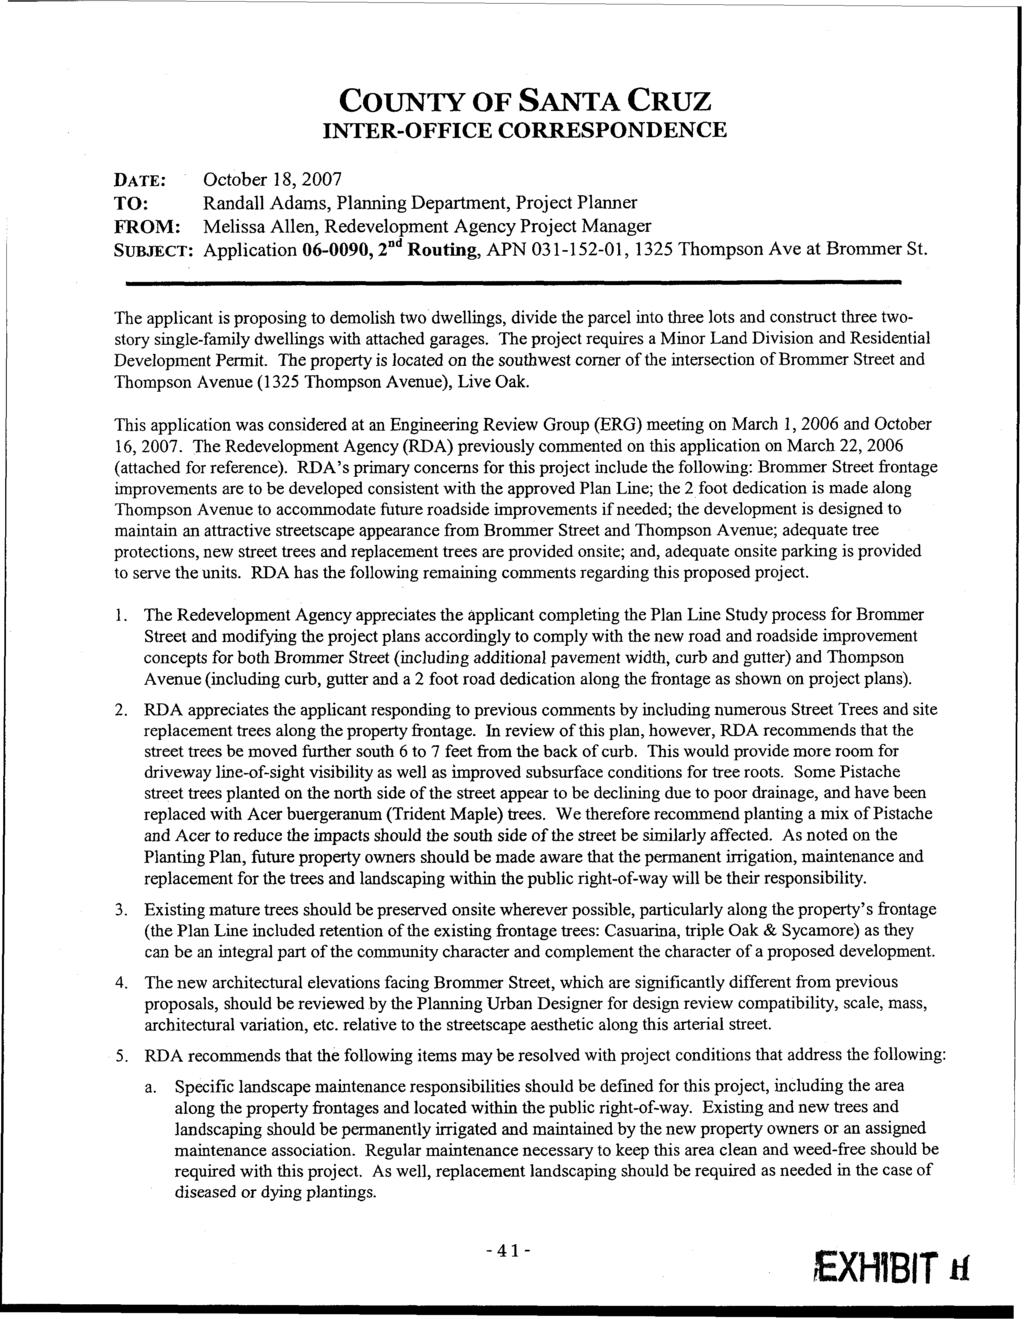 COUNTY OF SANTA CRUZ INTER-OFFICE CORRESPONDENCE I DATE: October 18,2007 TO: Randall Adams, Planning Department, Project Planner FROM: Melissa Allen, Redevelopment Agency Project Manager SUBJECT: